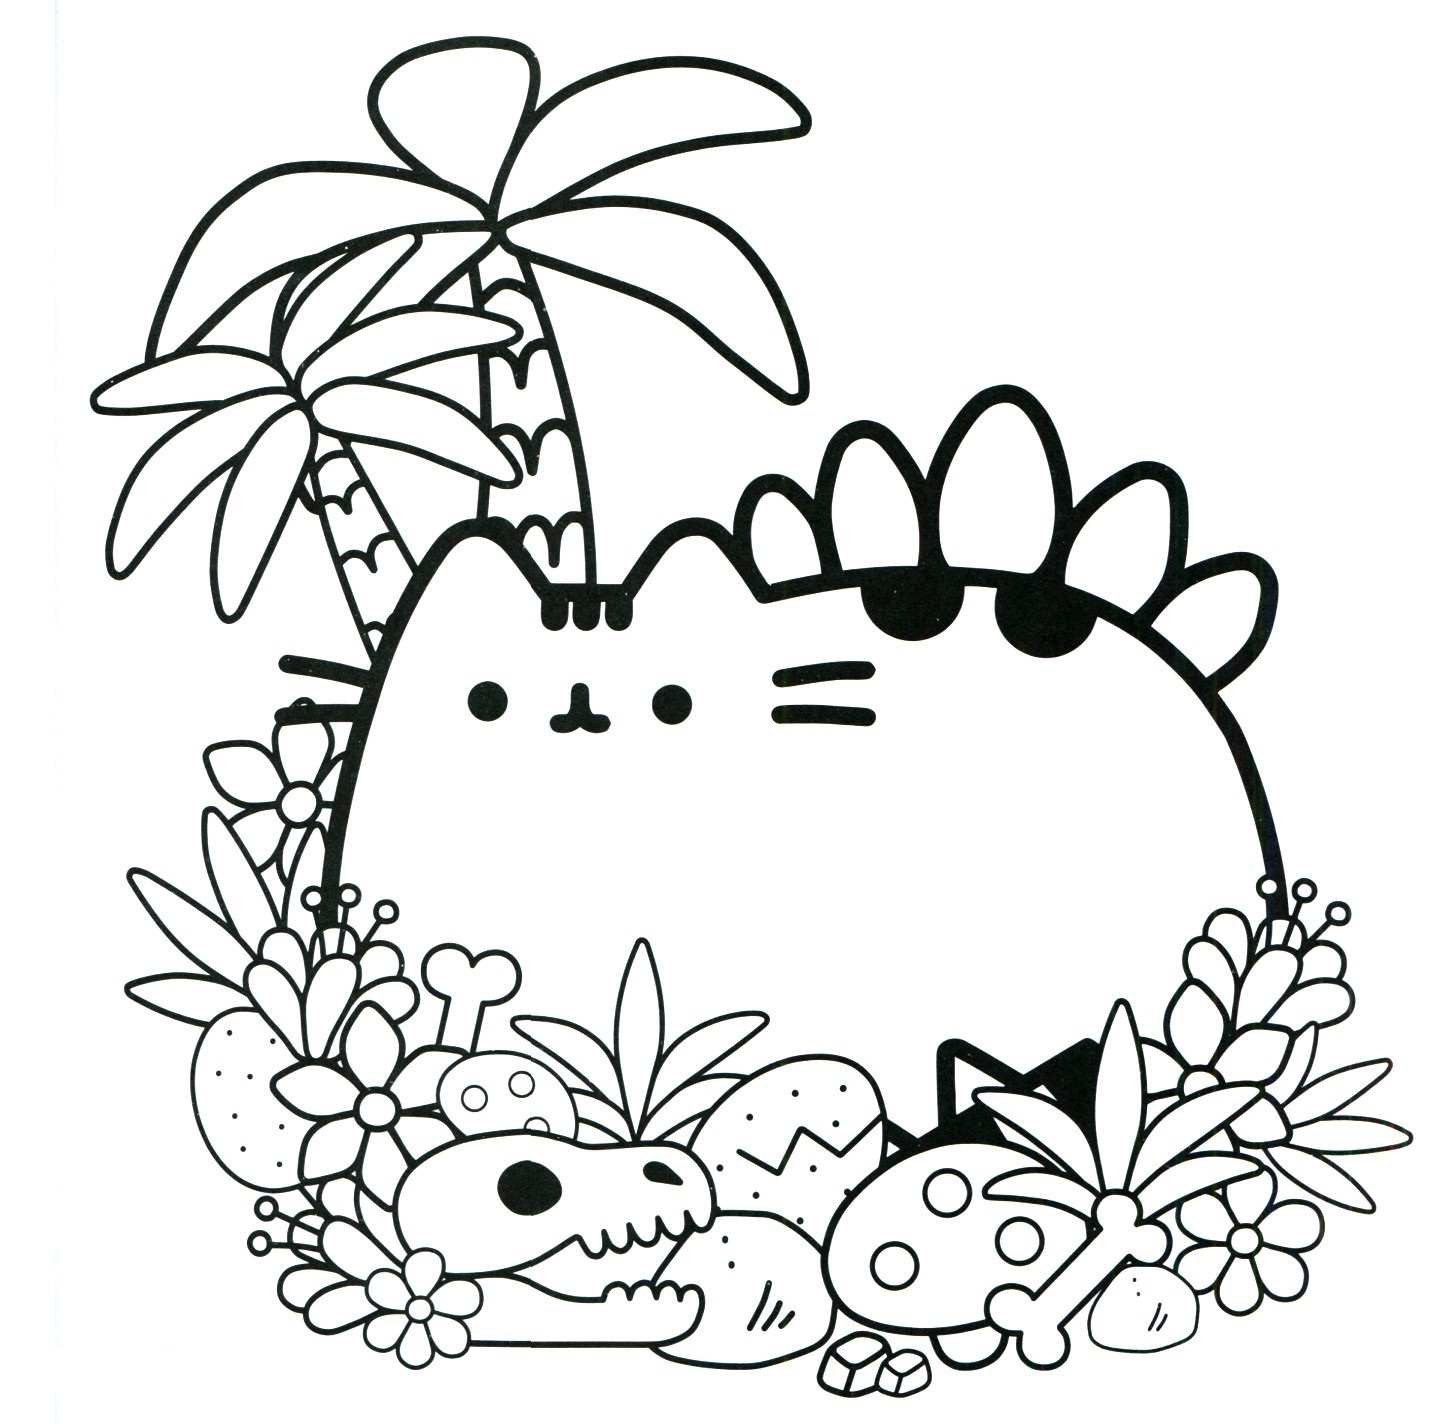 Cute Pusheen Coloring Page  Free Printable Coloring Pages 